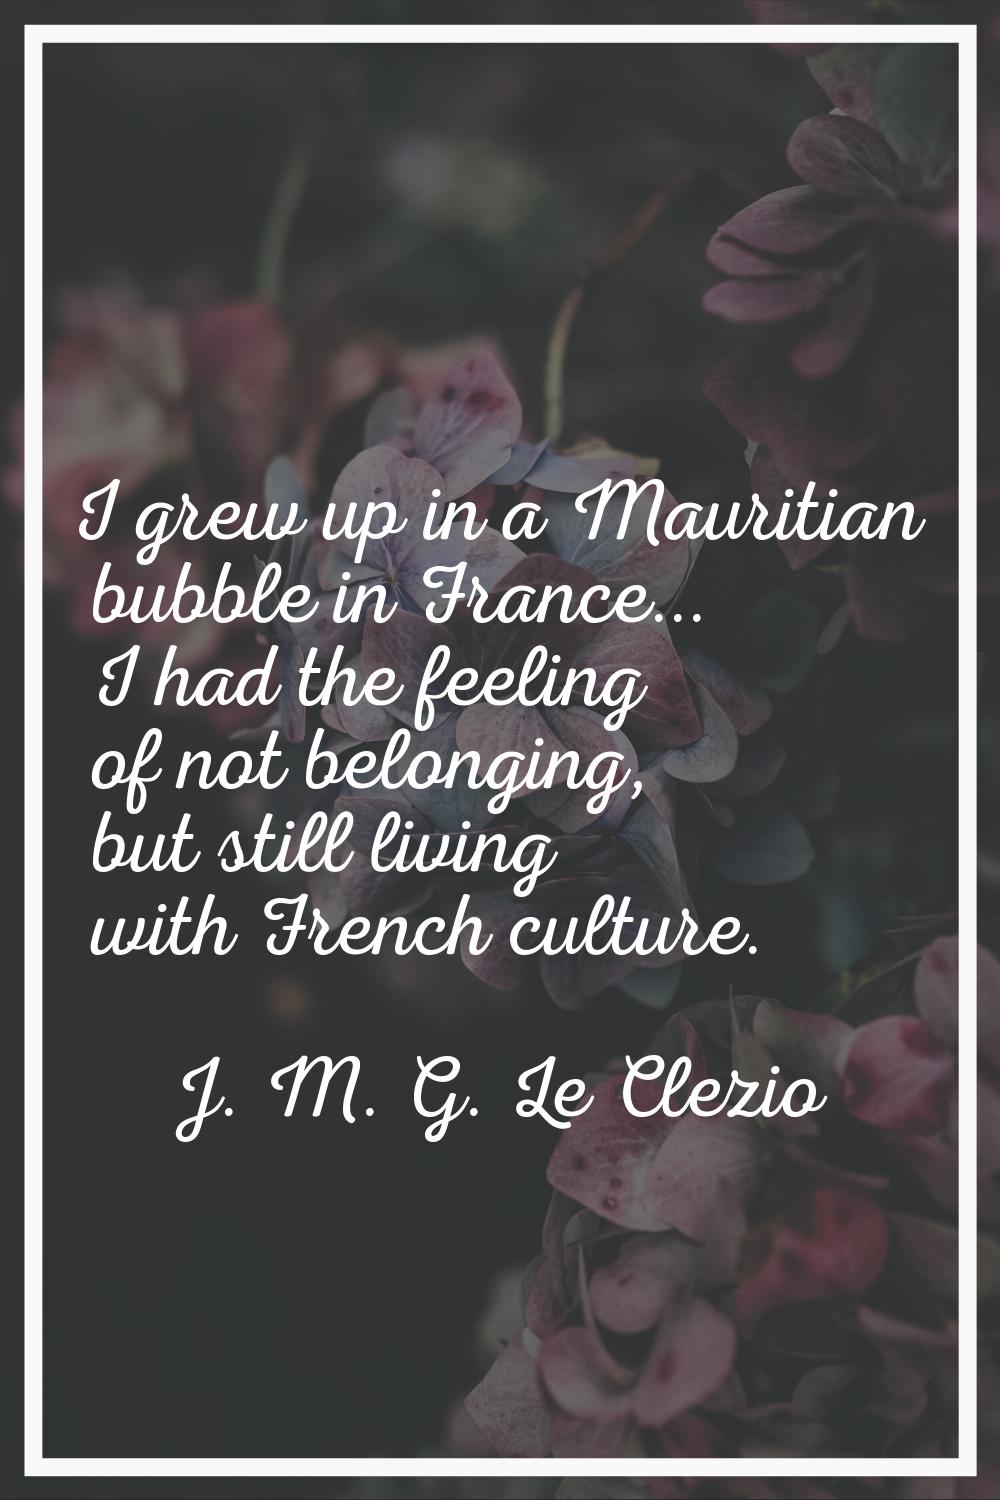 I grew up in a Mauritian bubble in France... I had the feeling of not belonging, but still living w